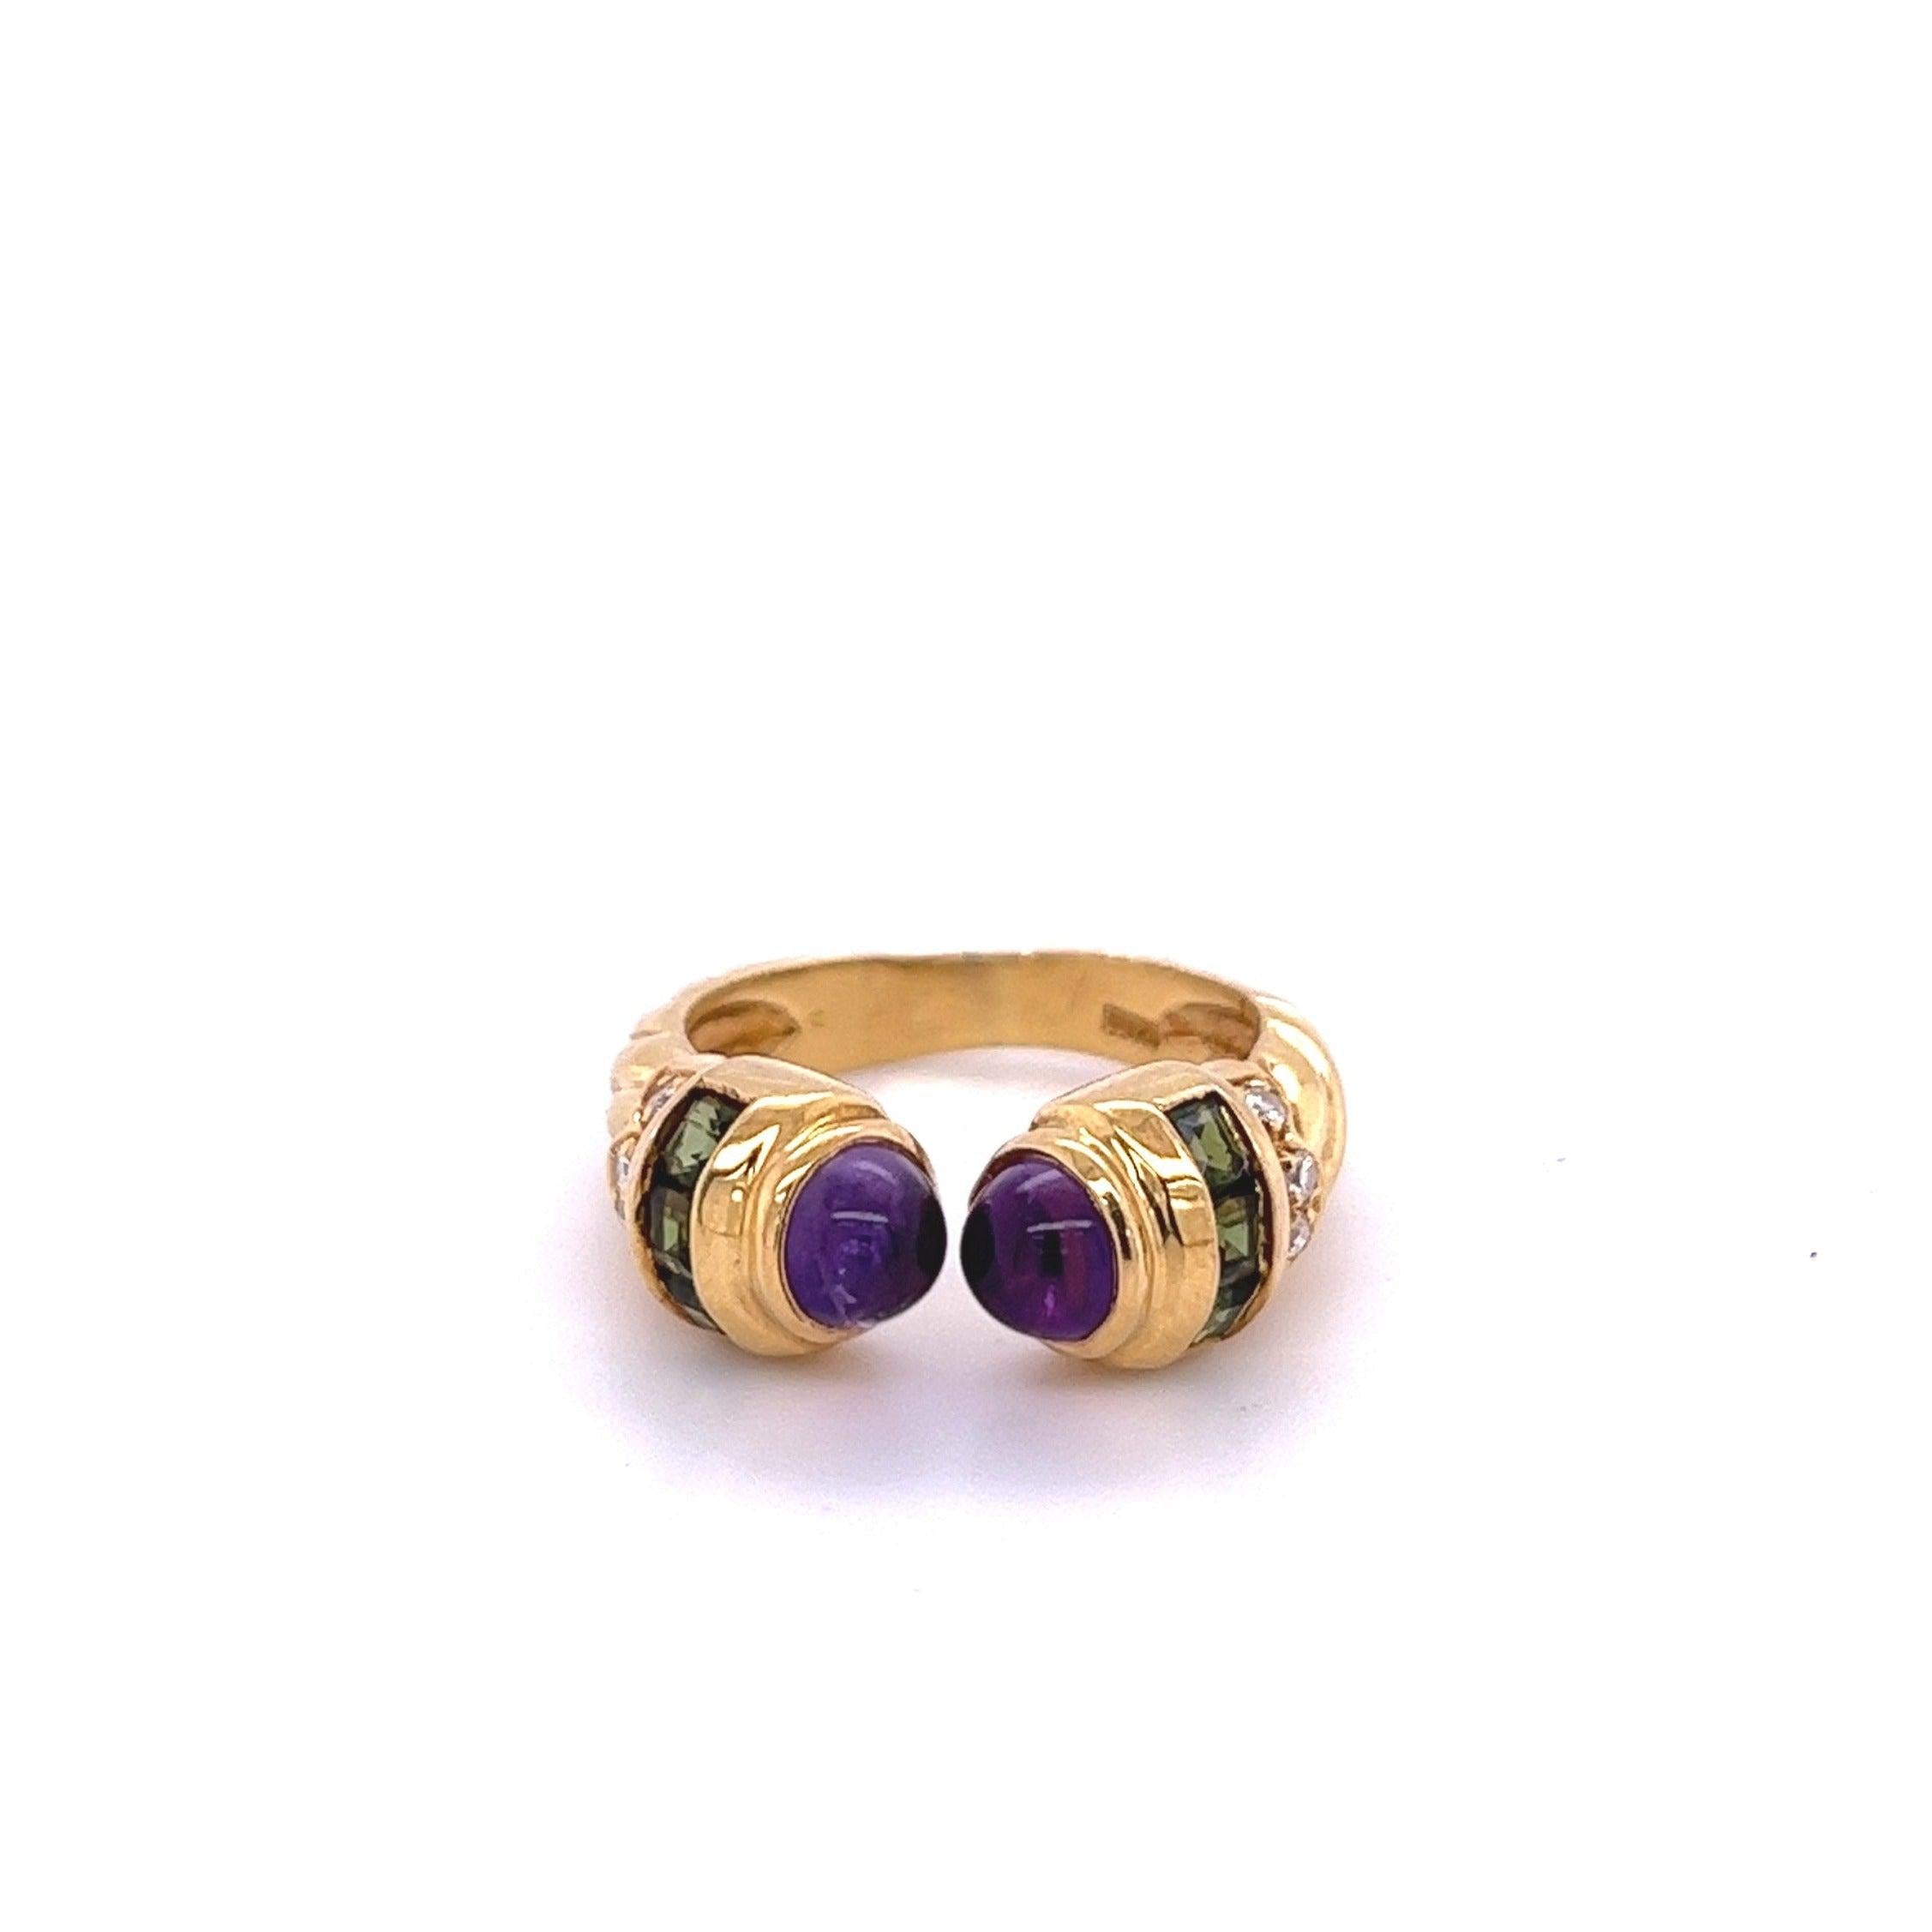 18k Gold Vintage Retro Open Ring With Amethyst, Peridot, and Diamonds-Rings-ASSAY